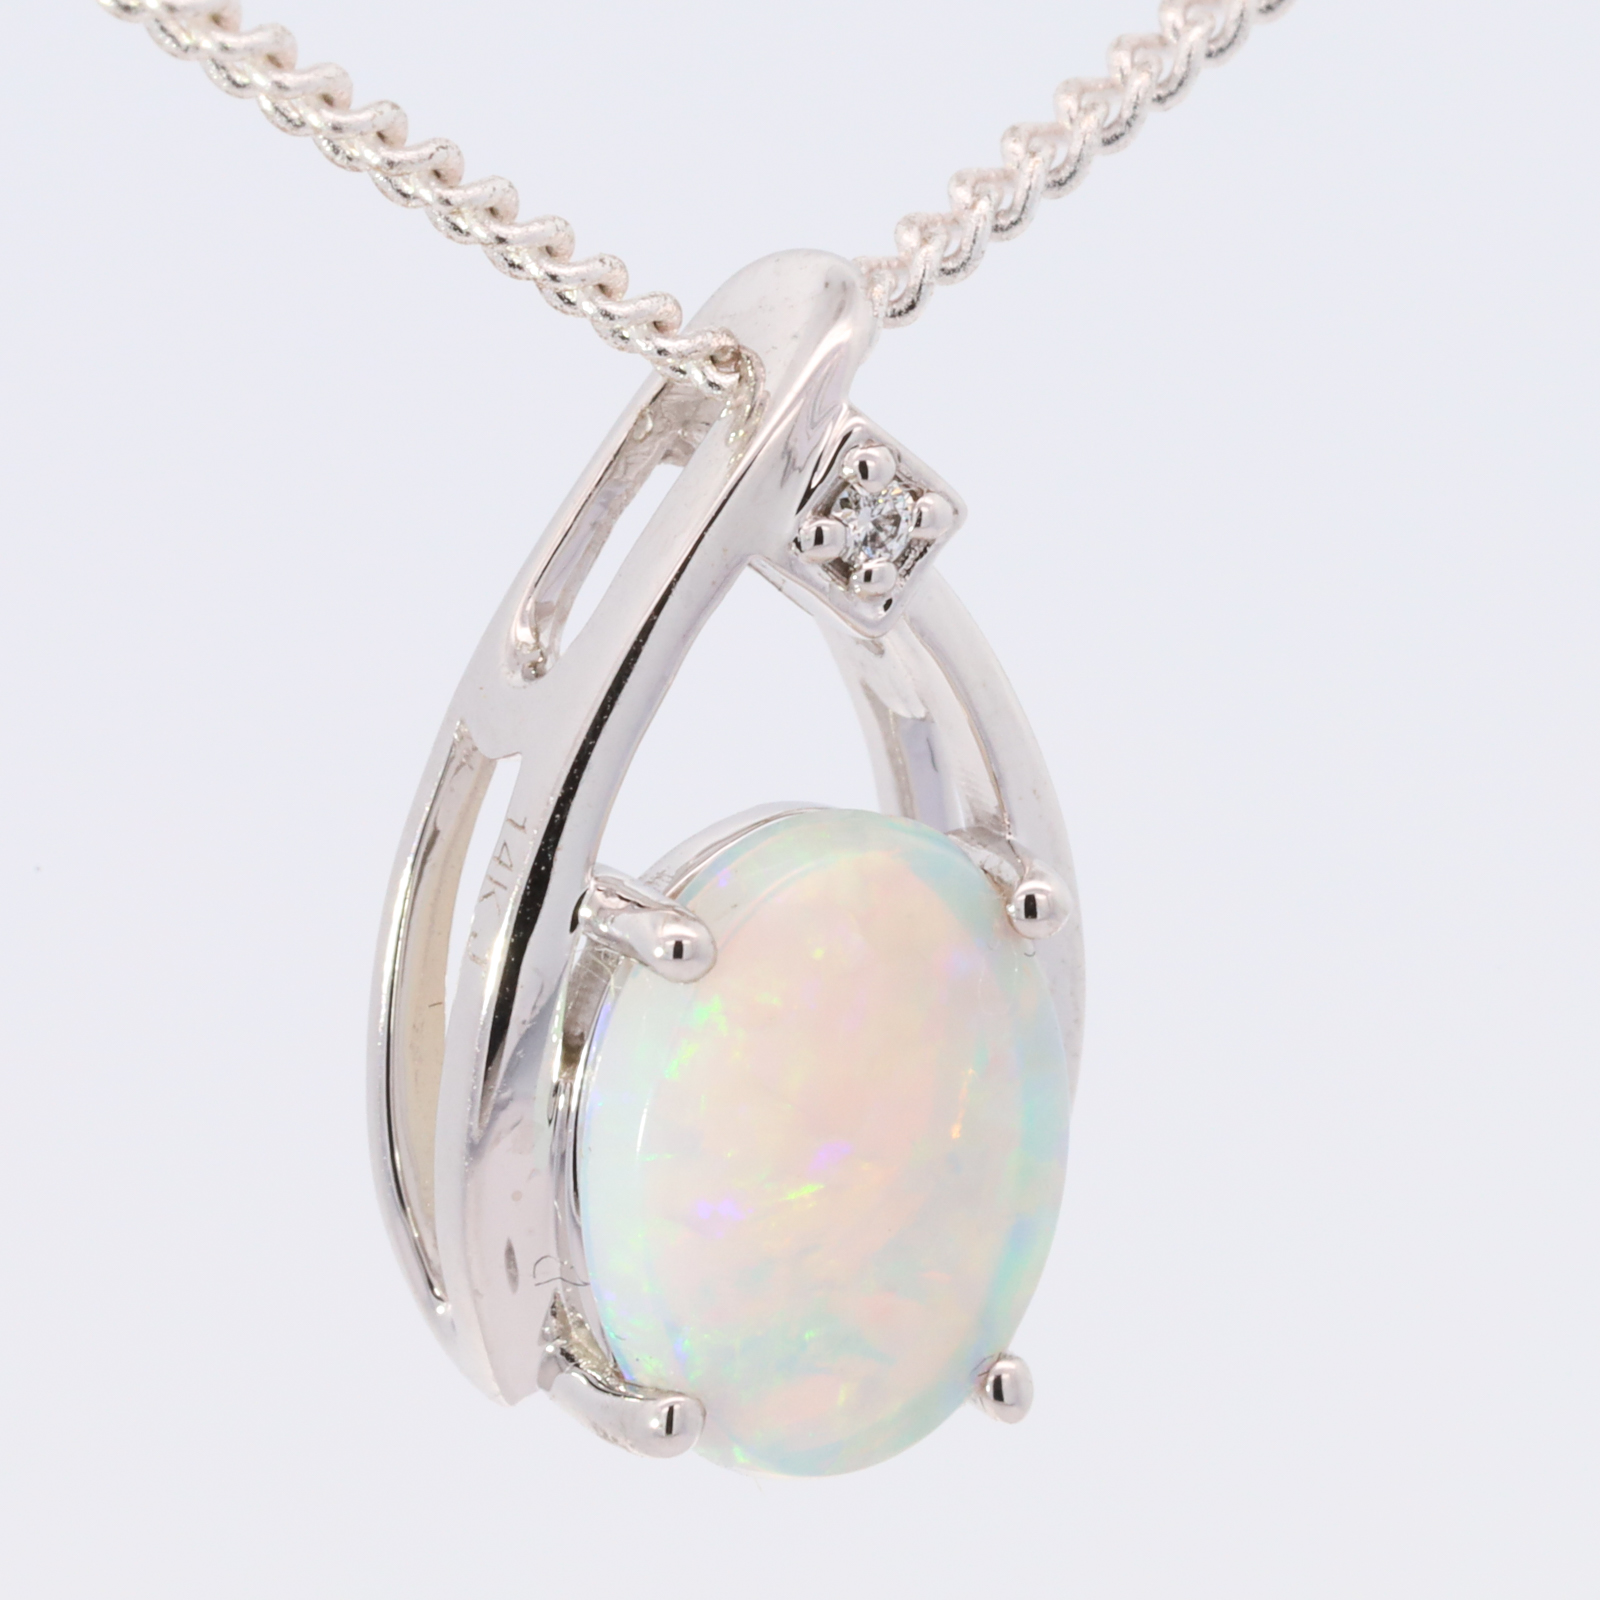 White Gold Blue Green Yellow Orange Solid Australian Crystal Opal Necklace Pendant with Diamond